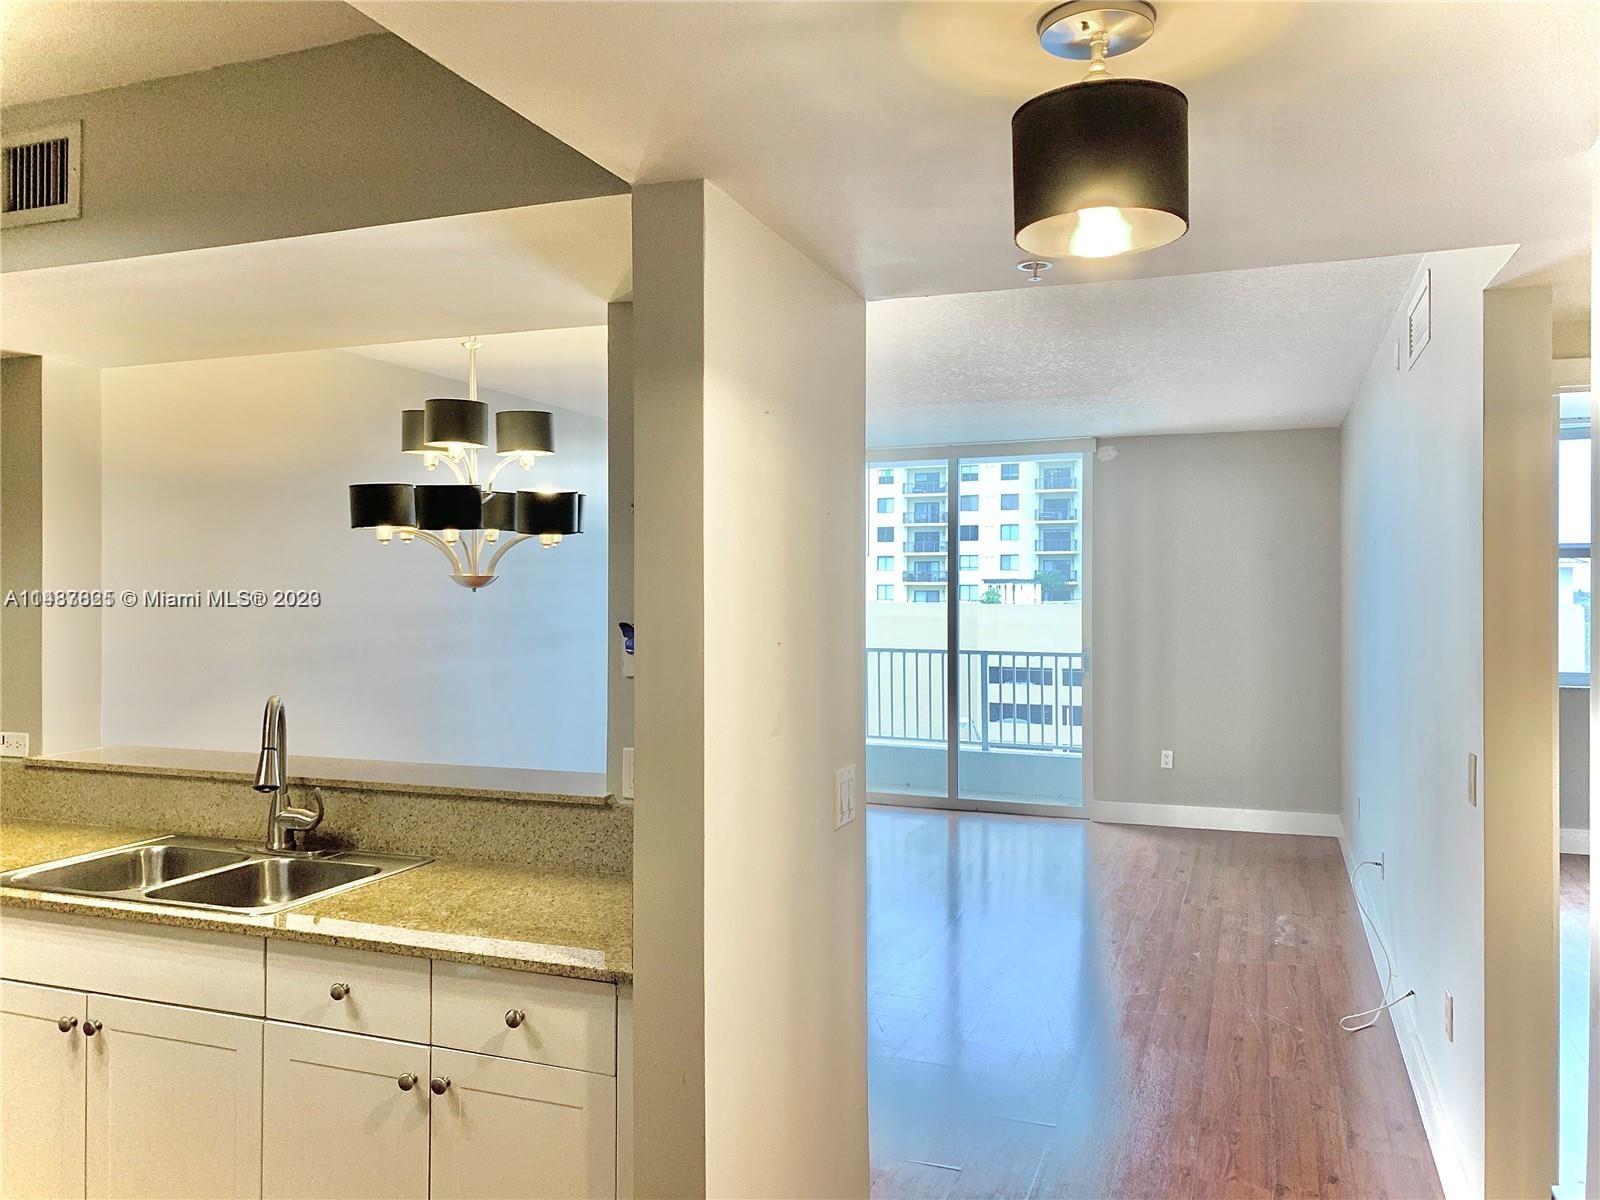 Photo of 117 NW 42 Ave #707 in Miami, FL